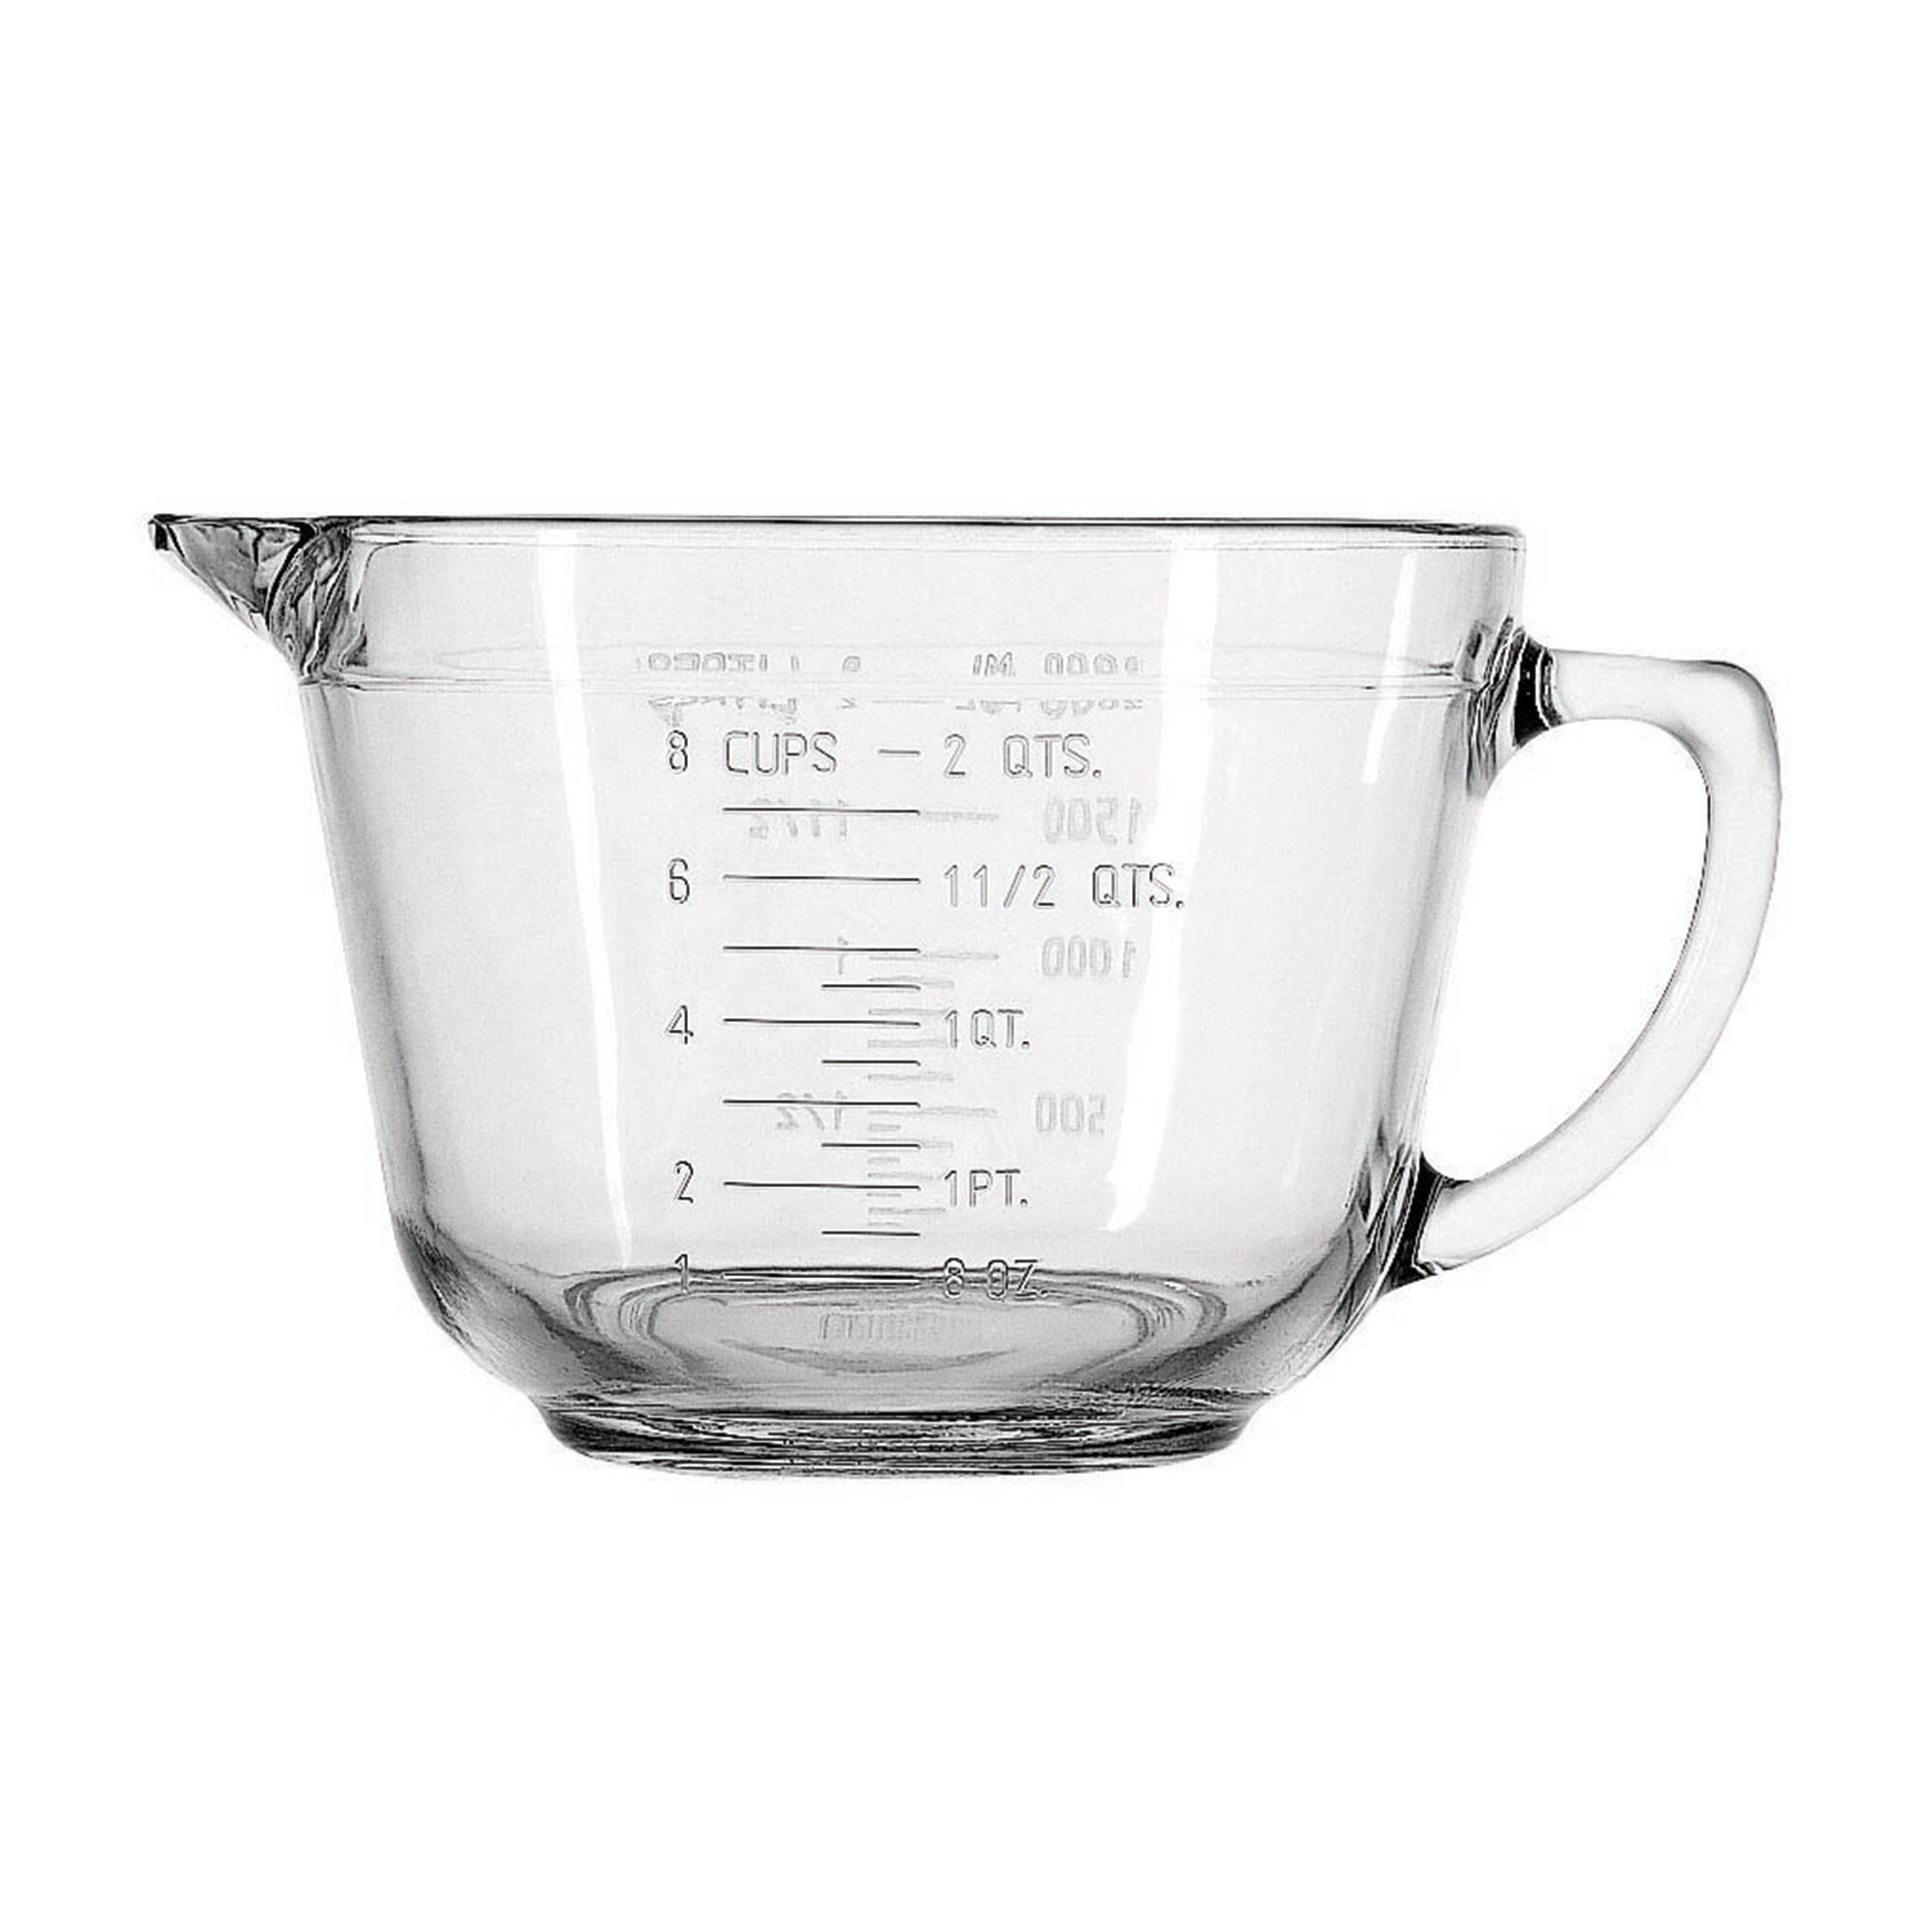 Anchor Hocking 77898 Measuring Cup Batter Bowl with Spout, Glass, 8-Cup